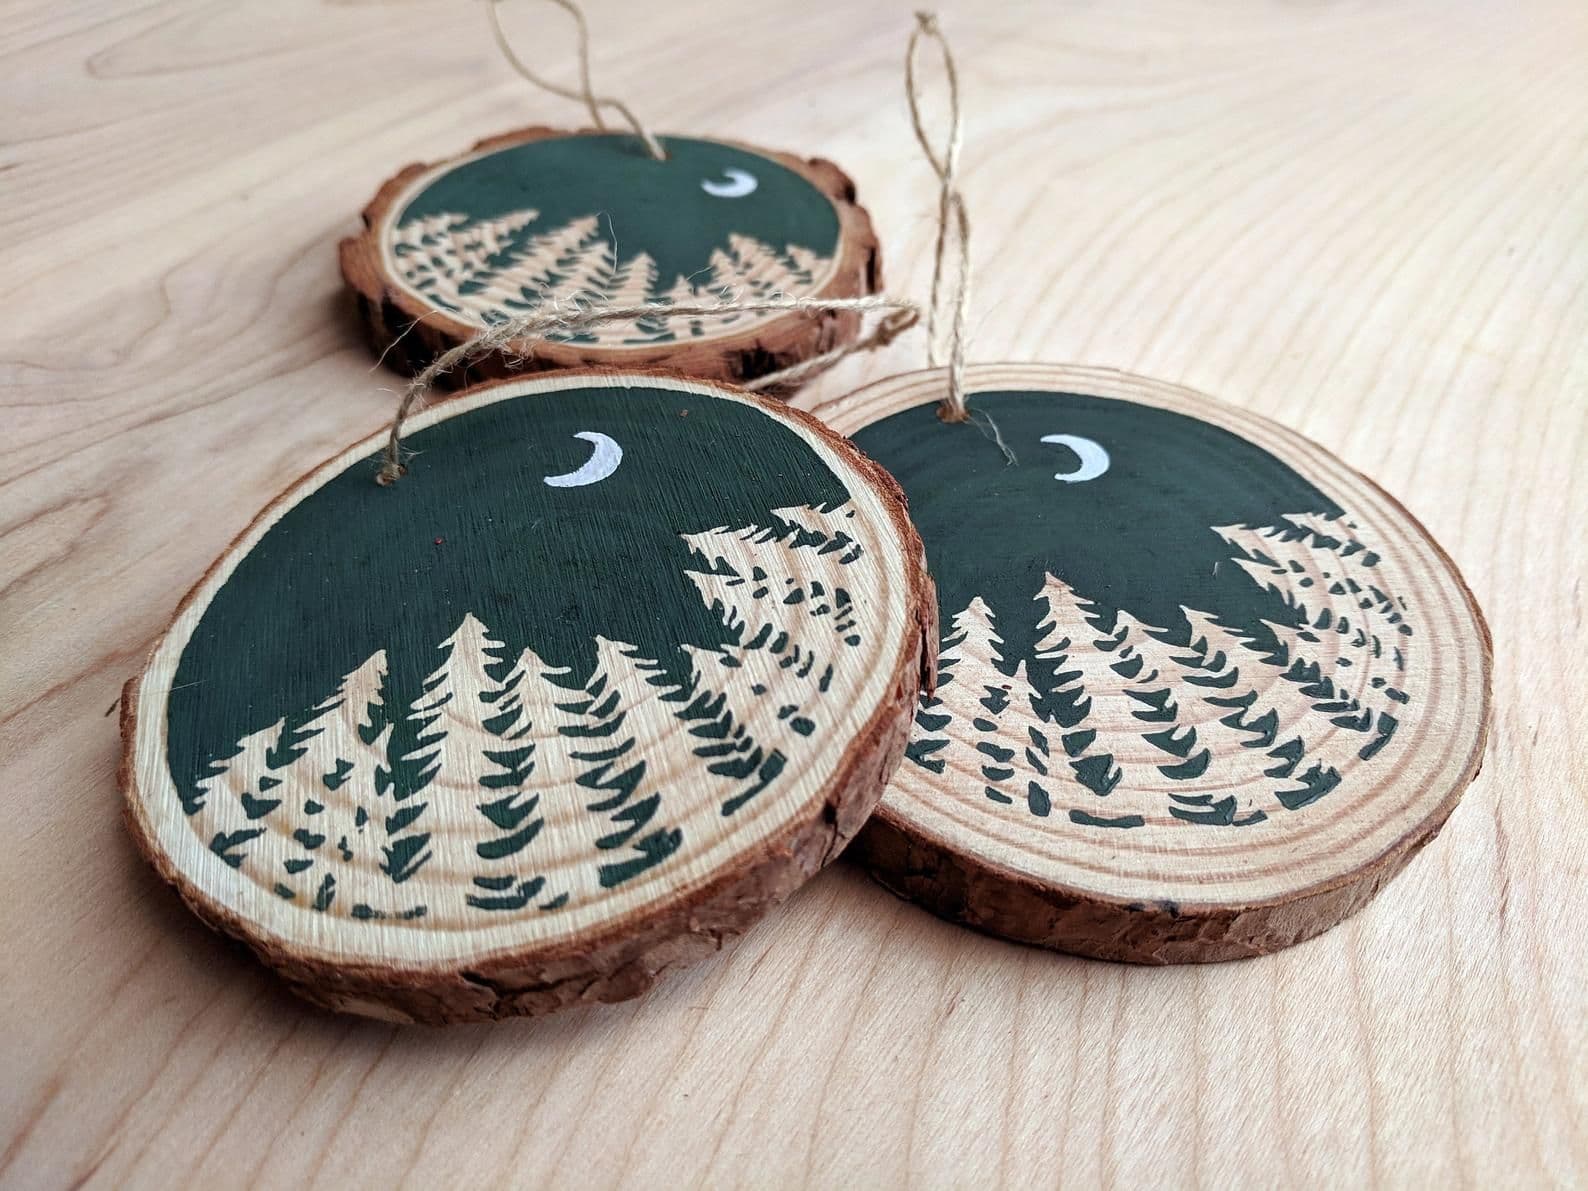 These handmade holiday ornaments from presswest are simultaneously calming and quirky.